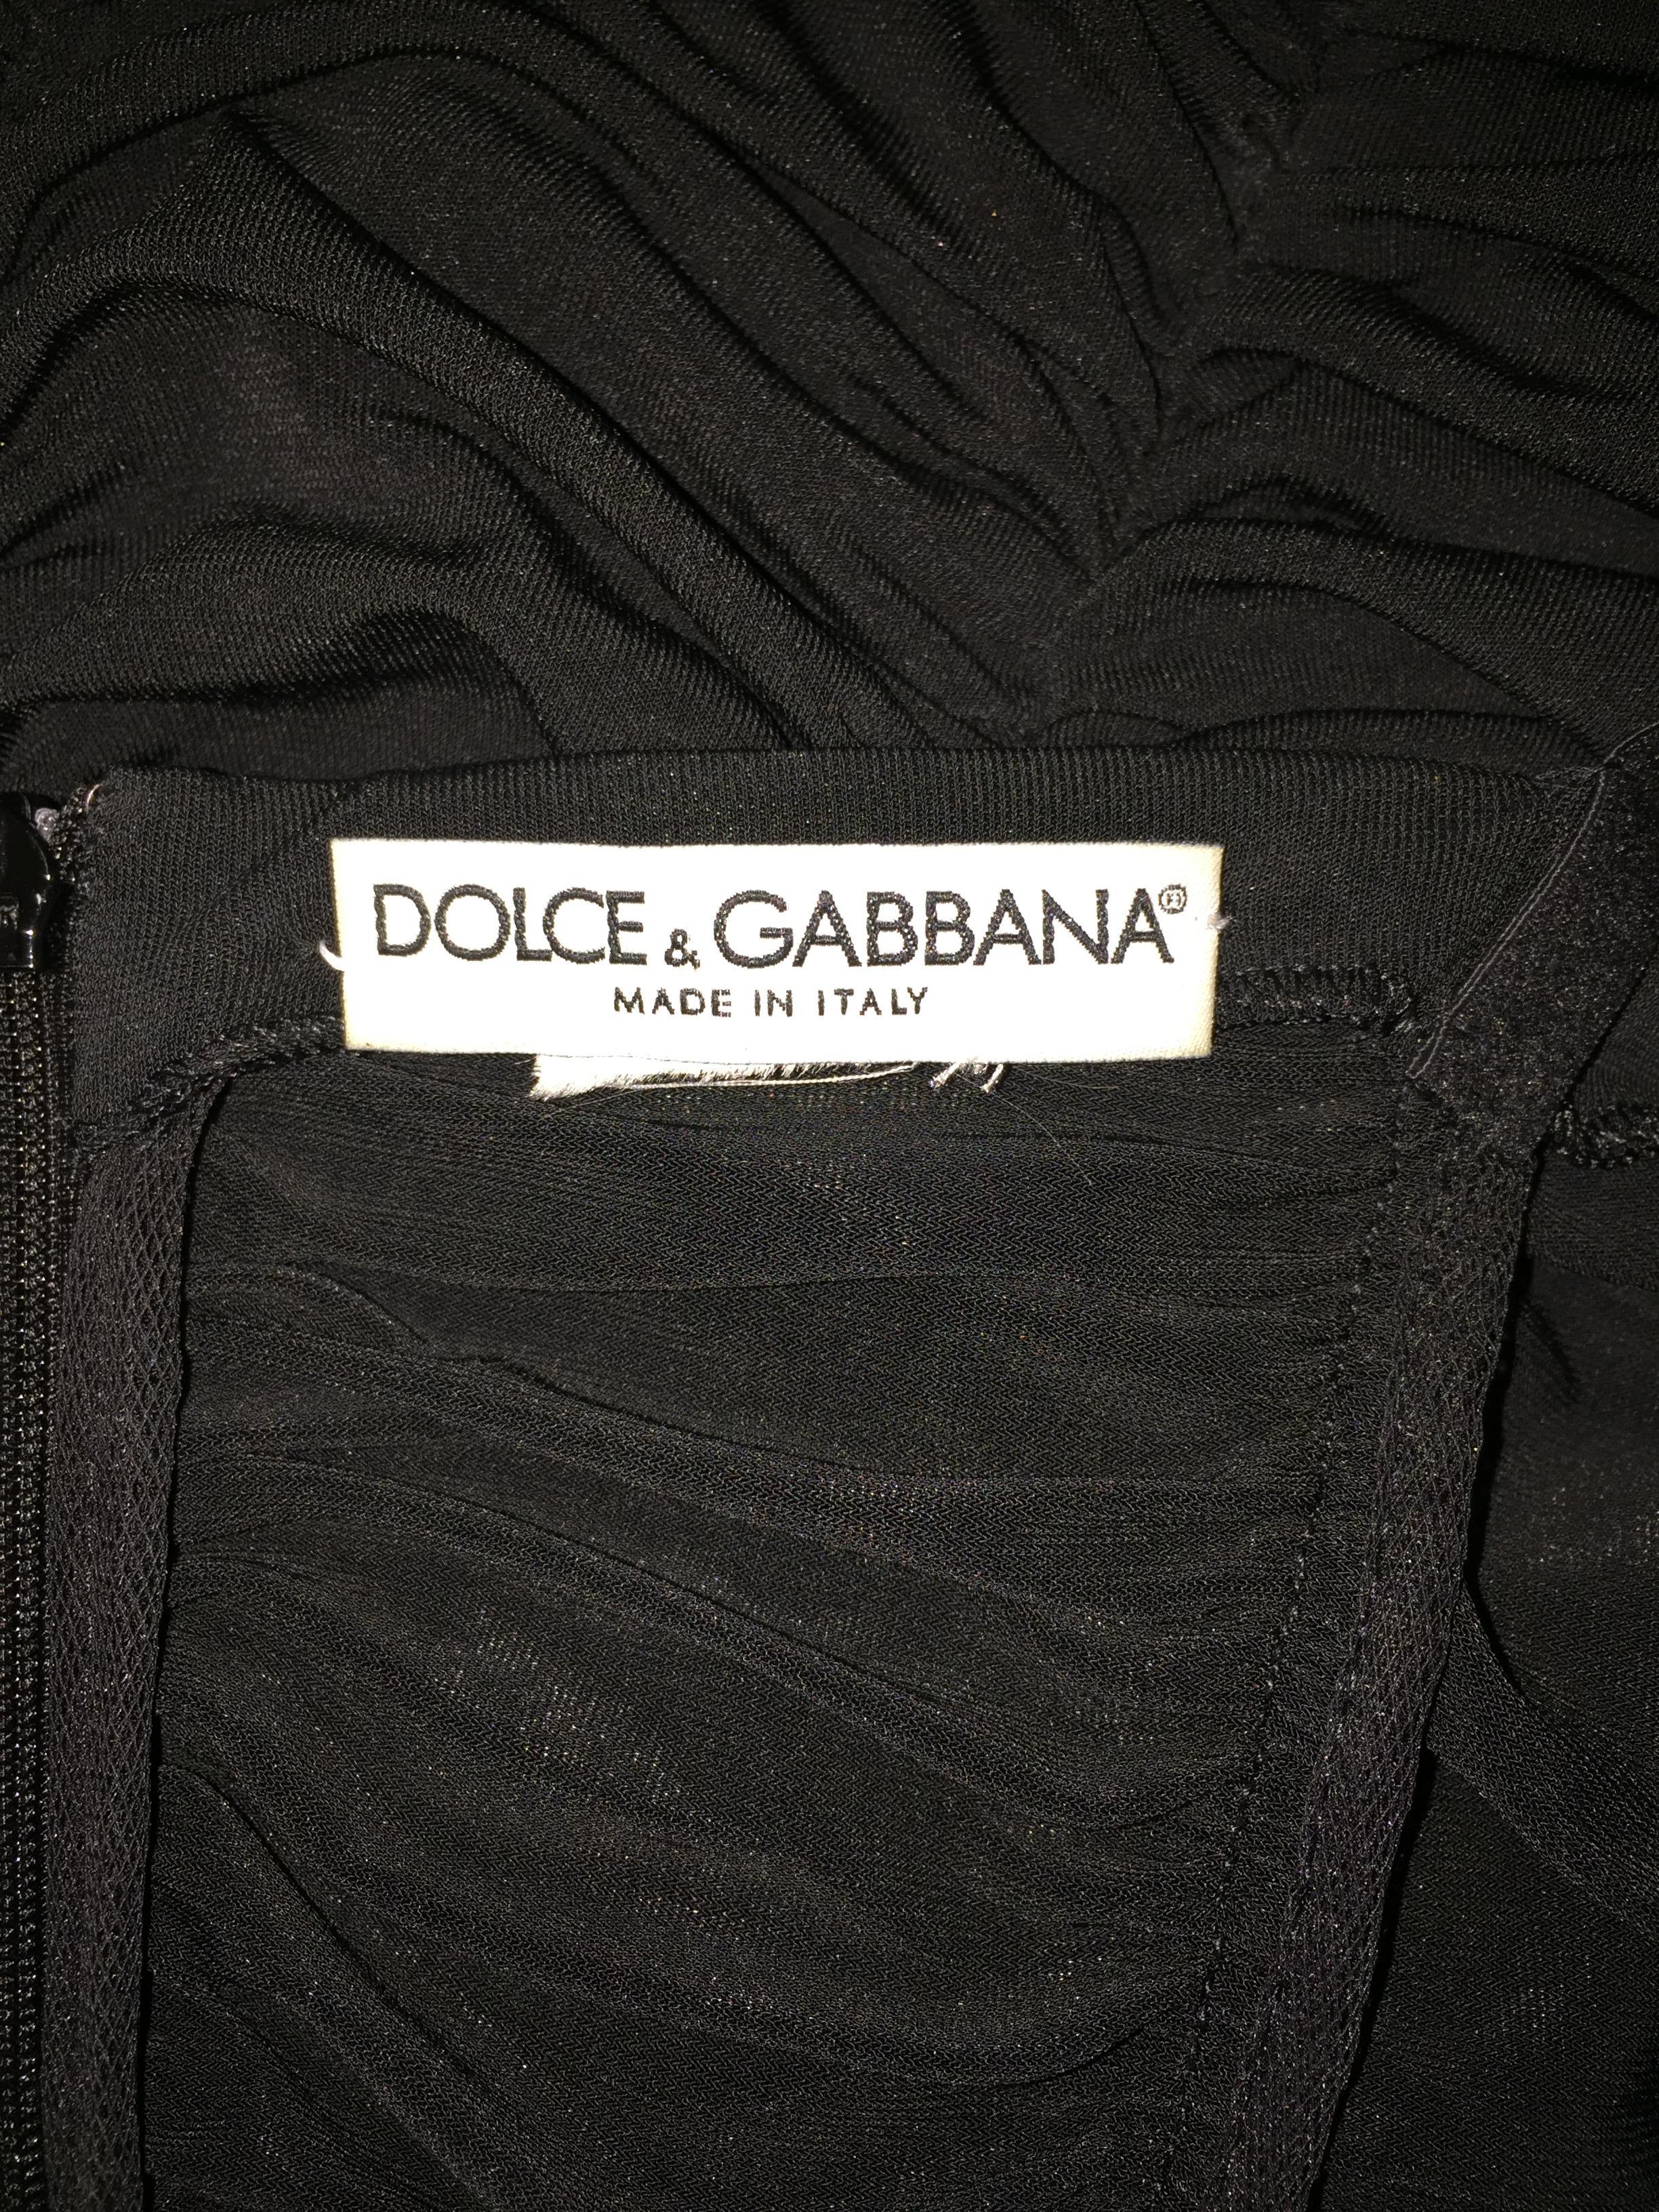 F/W 1995 Dolce & Gabbana Sheer Black Ruched Wiggle 1940's Style Pin-Up Dress 44 In Good Condition In Yukon, OK